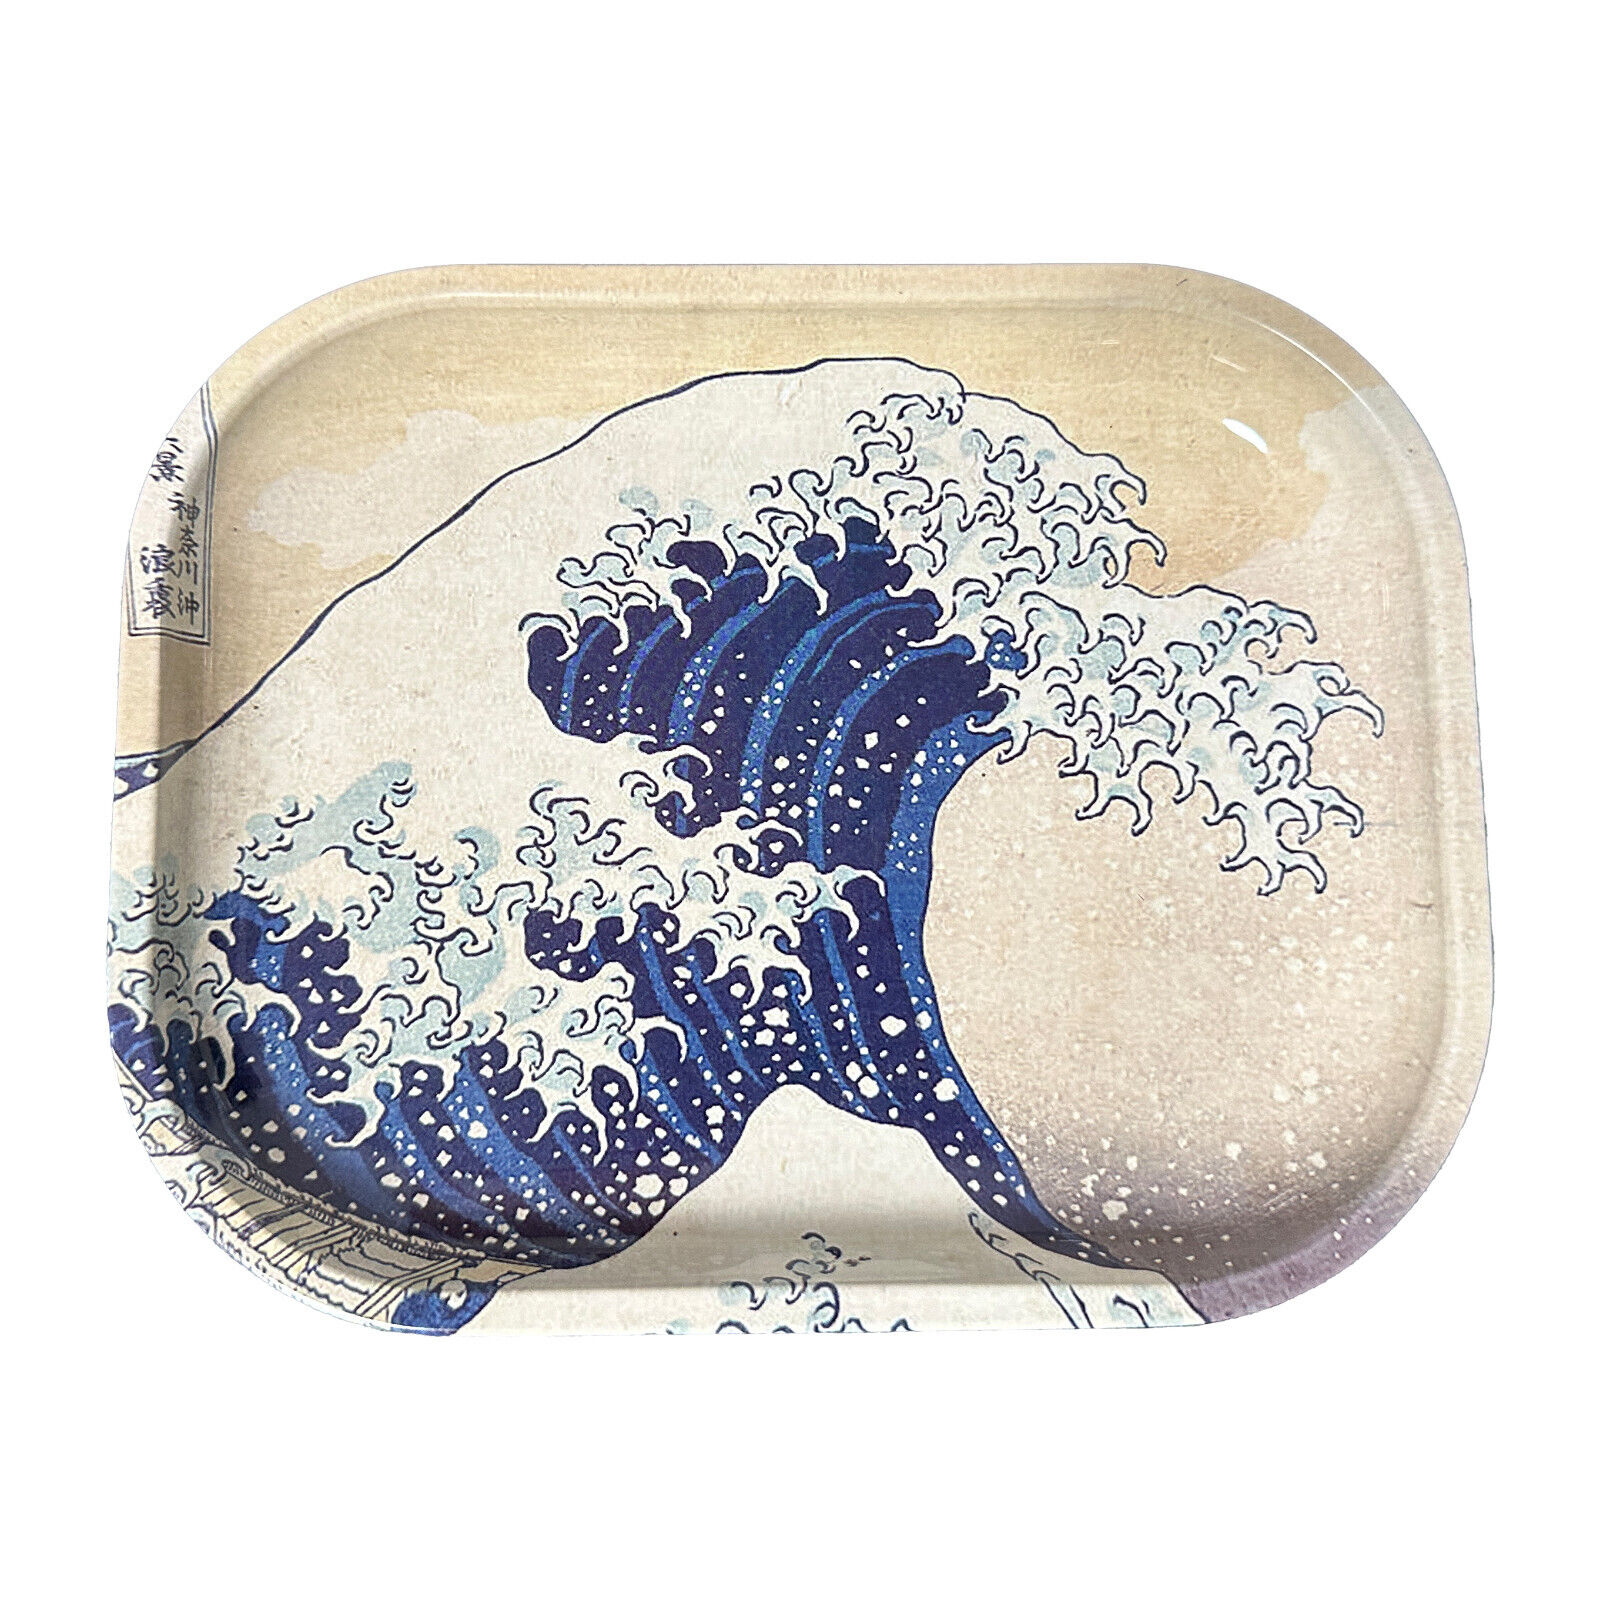 Rolling Tray 5.5 x 7 Metal Ashtray Tobacco Smoke Accessories Great Wave. Available Now for 7.99